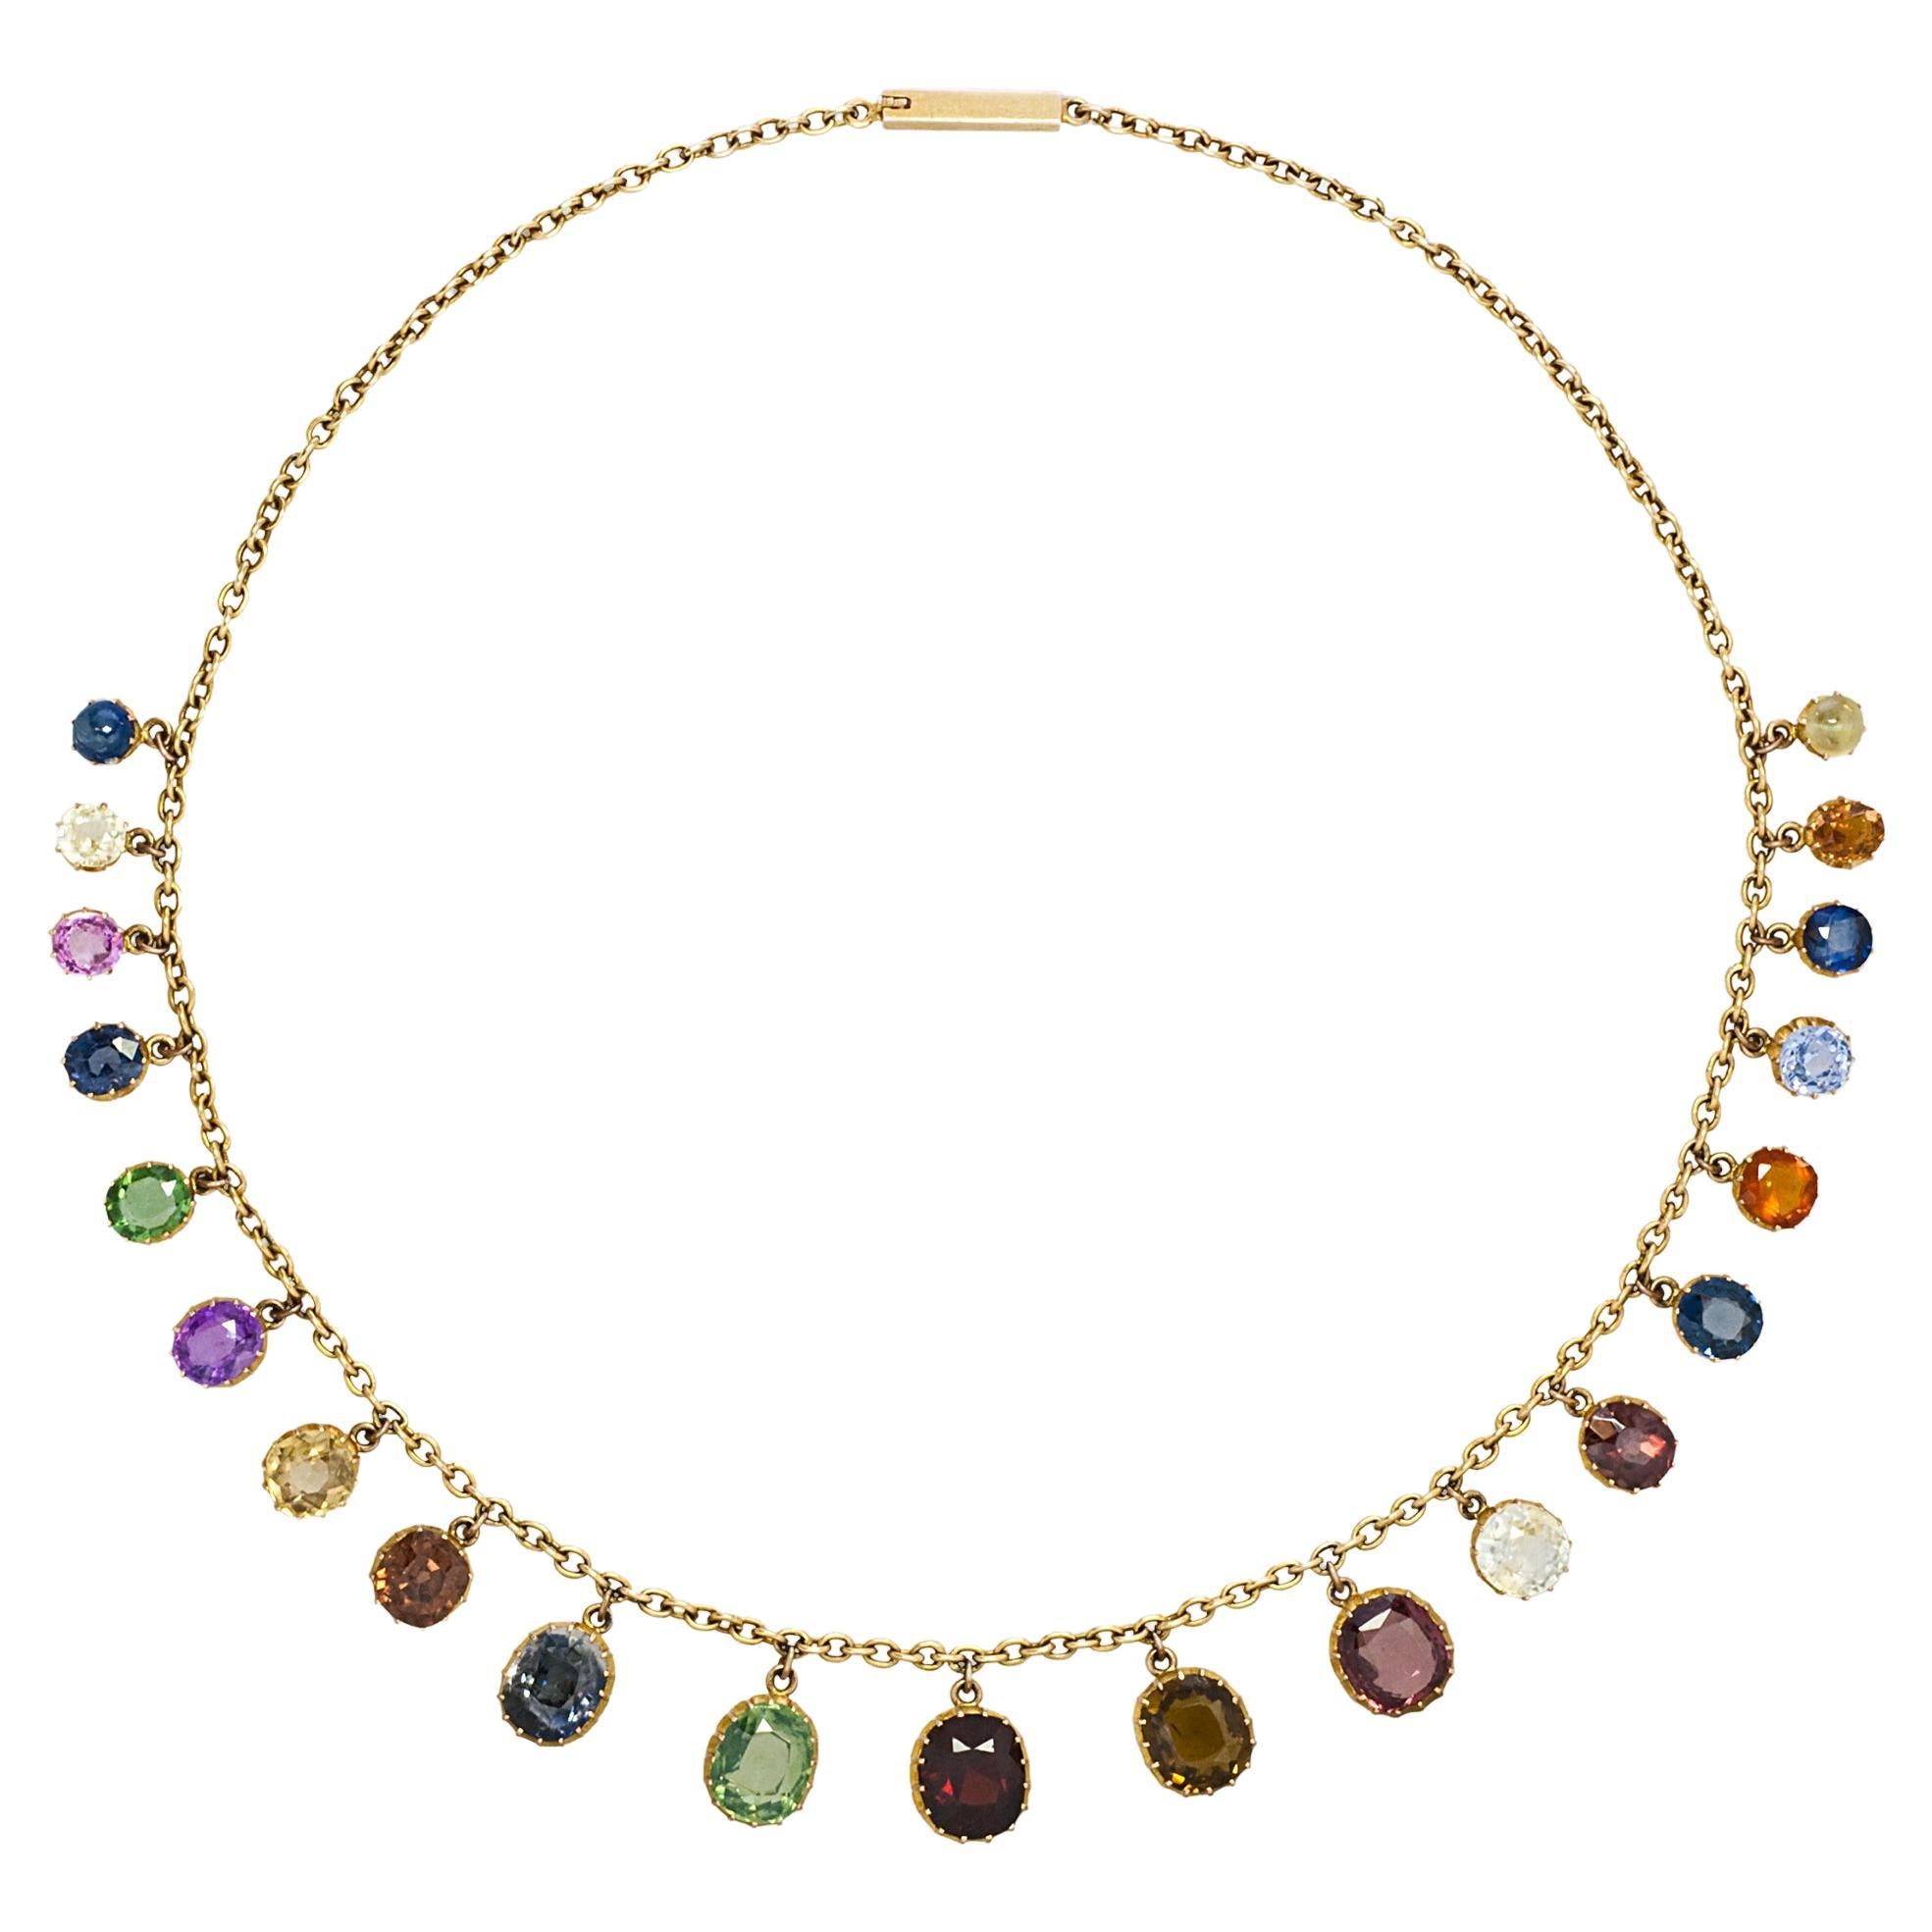 Antique 18K Gold and Multi-Colored Gemset Necklace, Circa 1880 For Sale